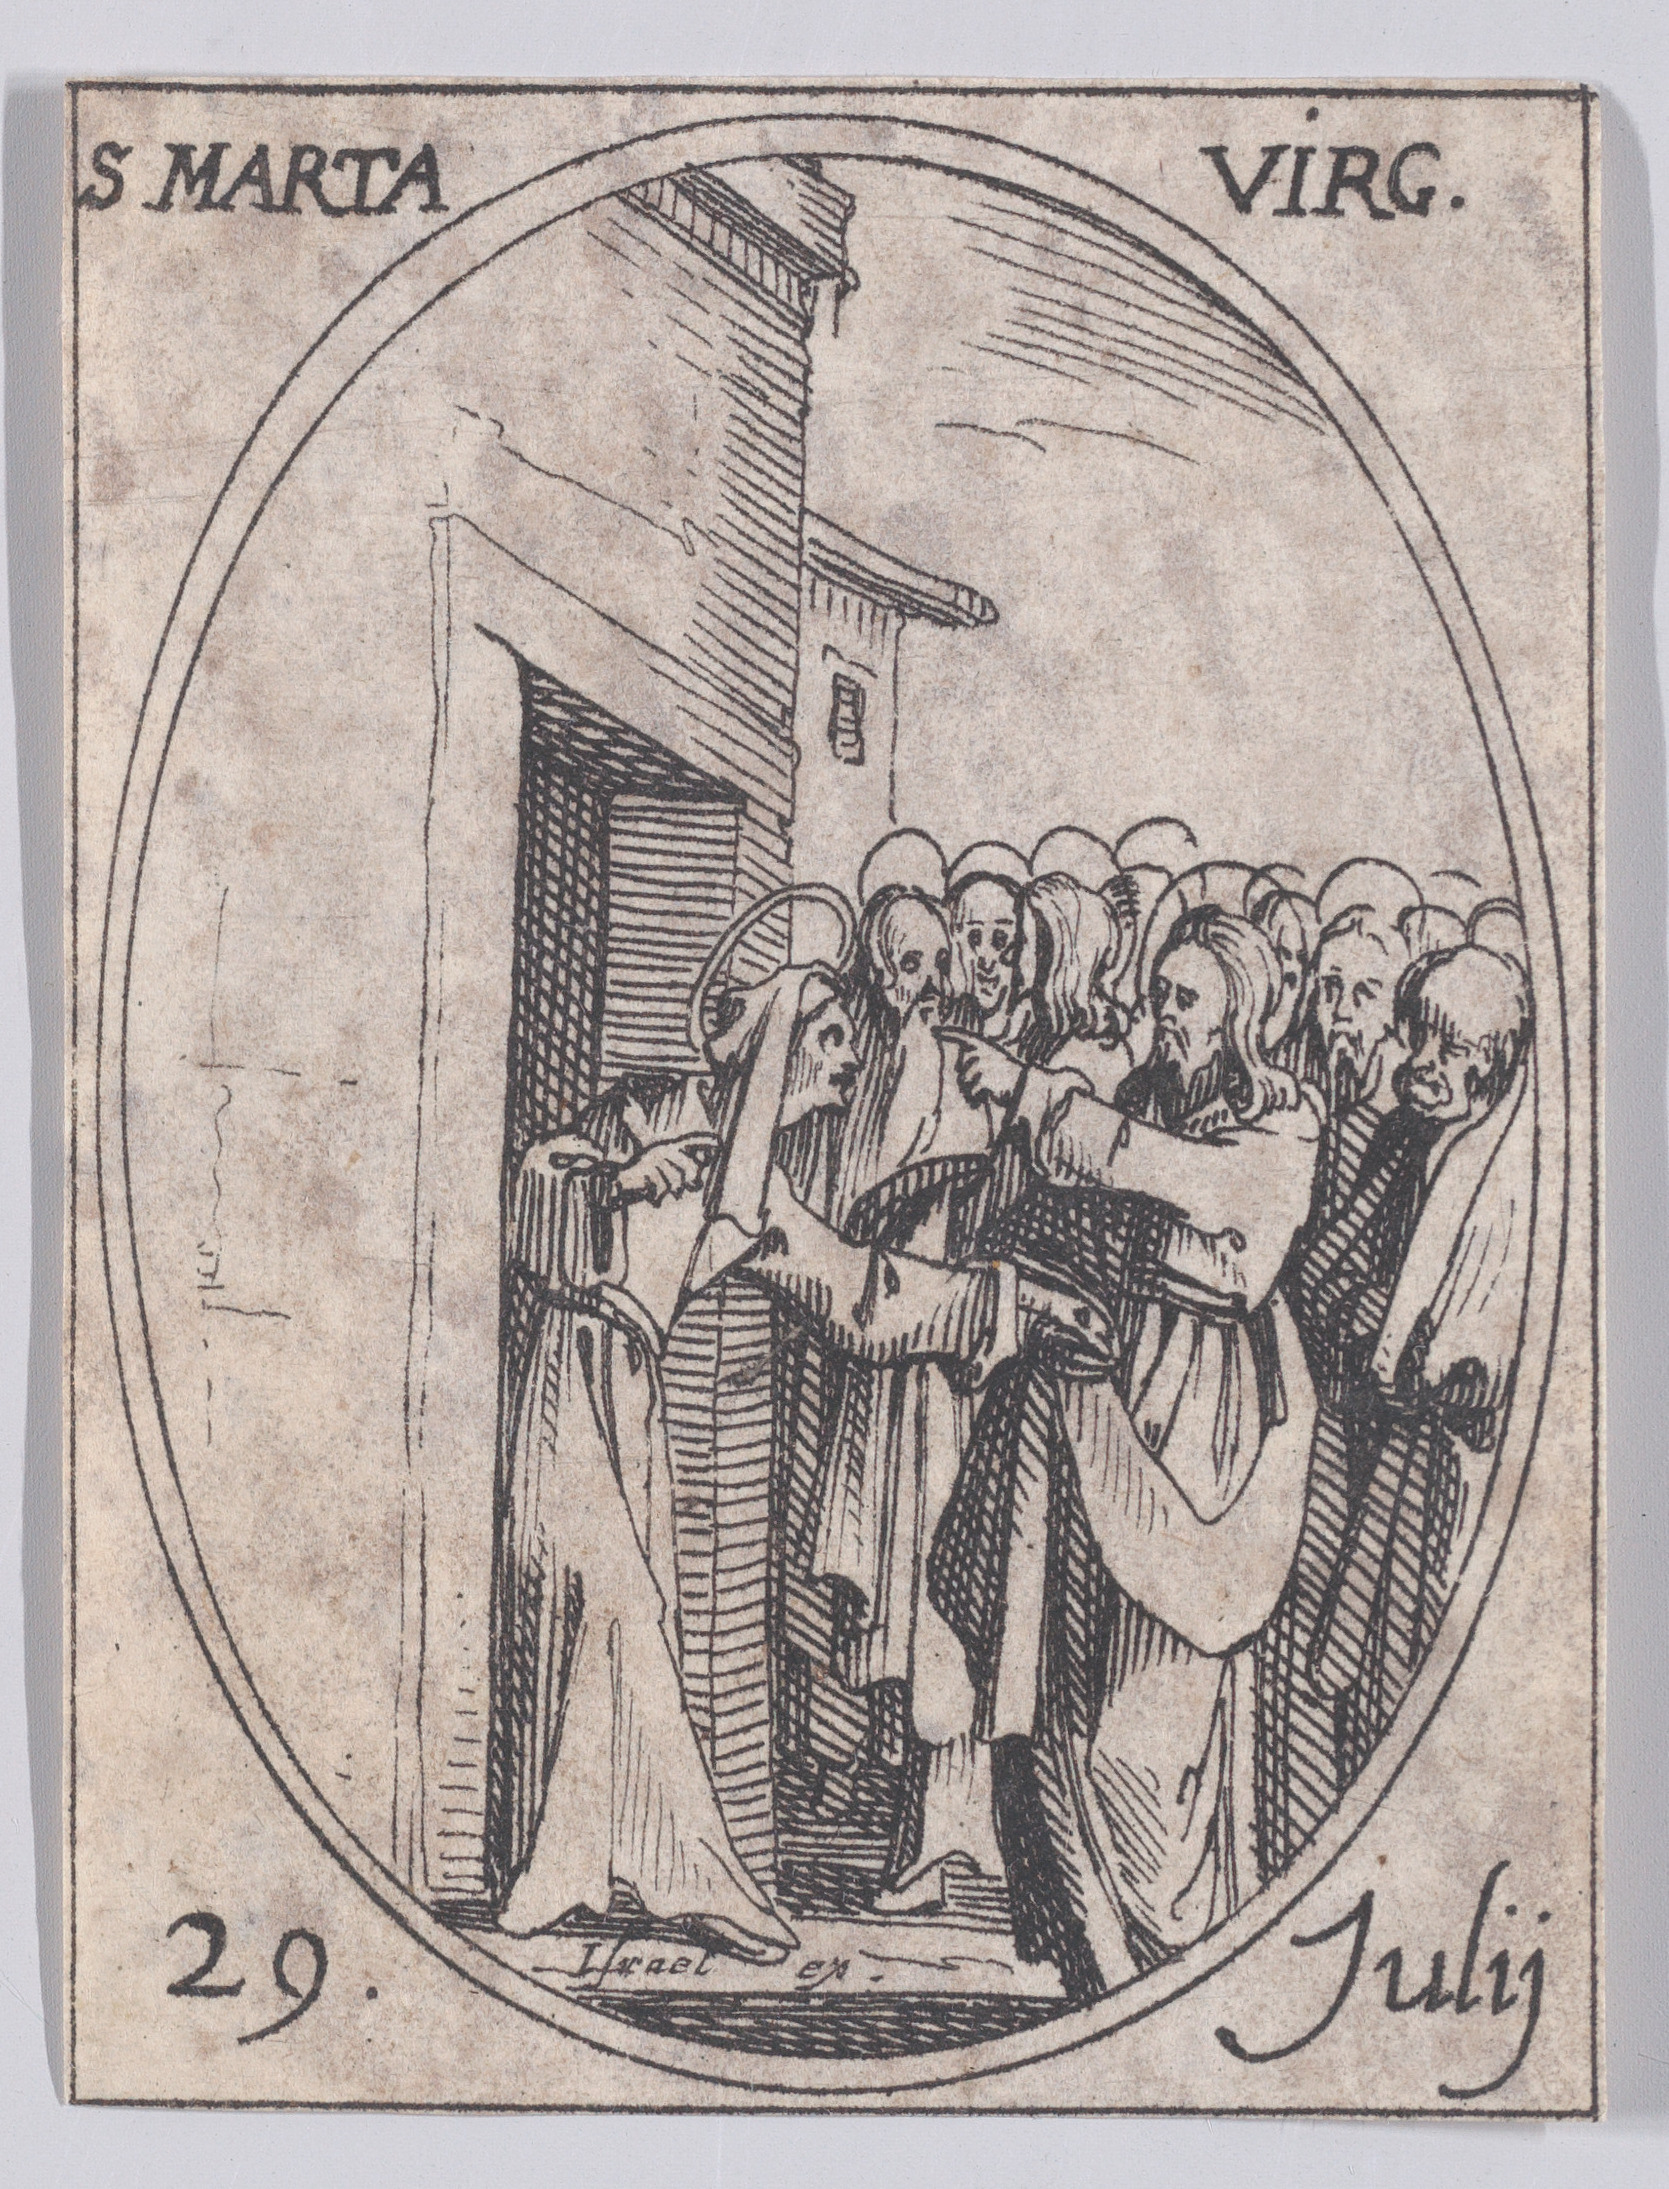 Ste. Marthe, vierge (St. Martha, Virgin), July 29th, from Les Images De Tous Les Saincts et Saintes de L'Année (Images of All of the Saints and Religious Events of the Year), Jacques Callot (French, Nancy 1592–1635 Nancy), Etching; second state of two (Lieure)